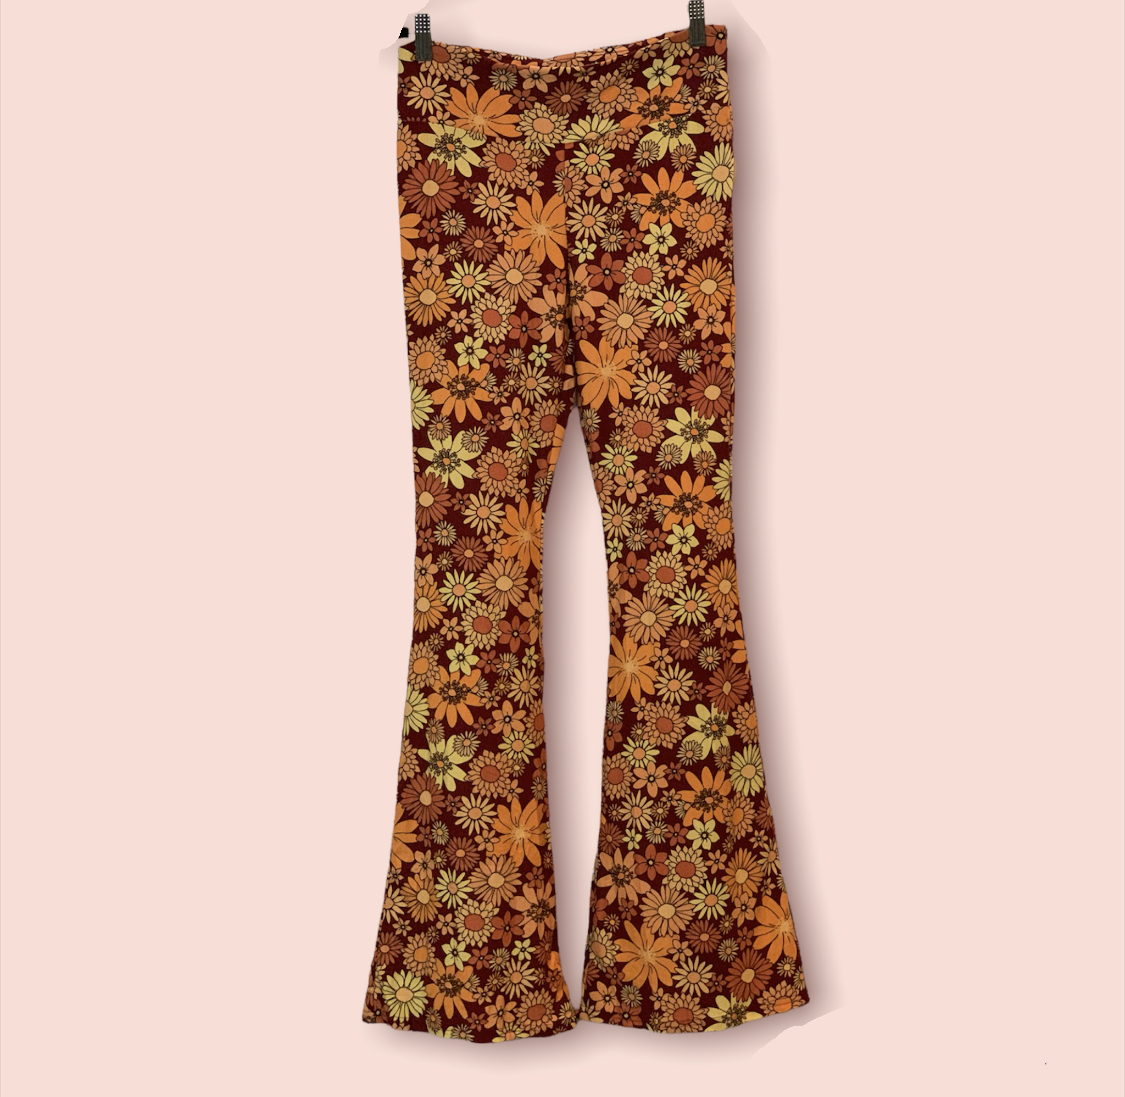 These groovy and fun bell bottom pants are made of a stretchy fabric with lots of give! These pants are so fun and perfect for anyone who loves color!